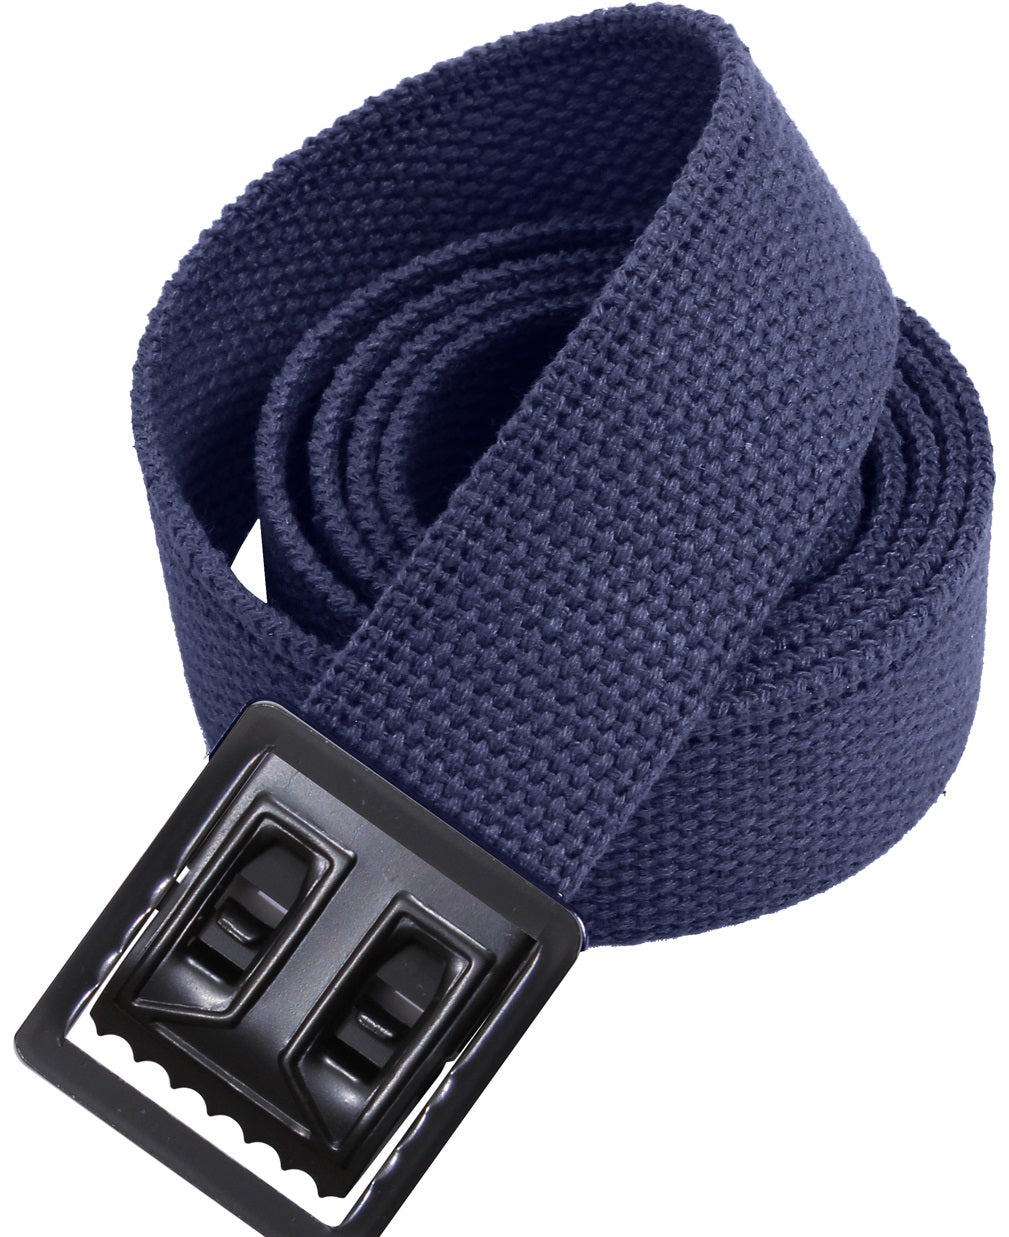 Rothco Web Belts with Open Face Buckle